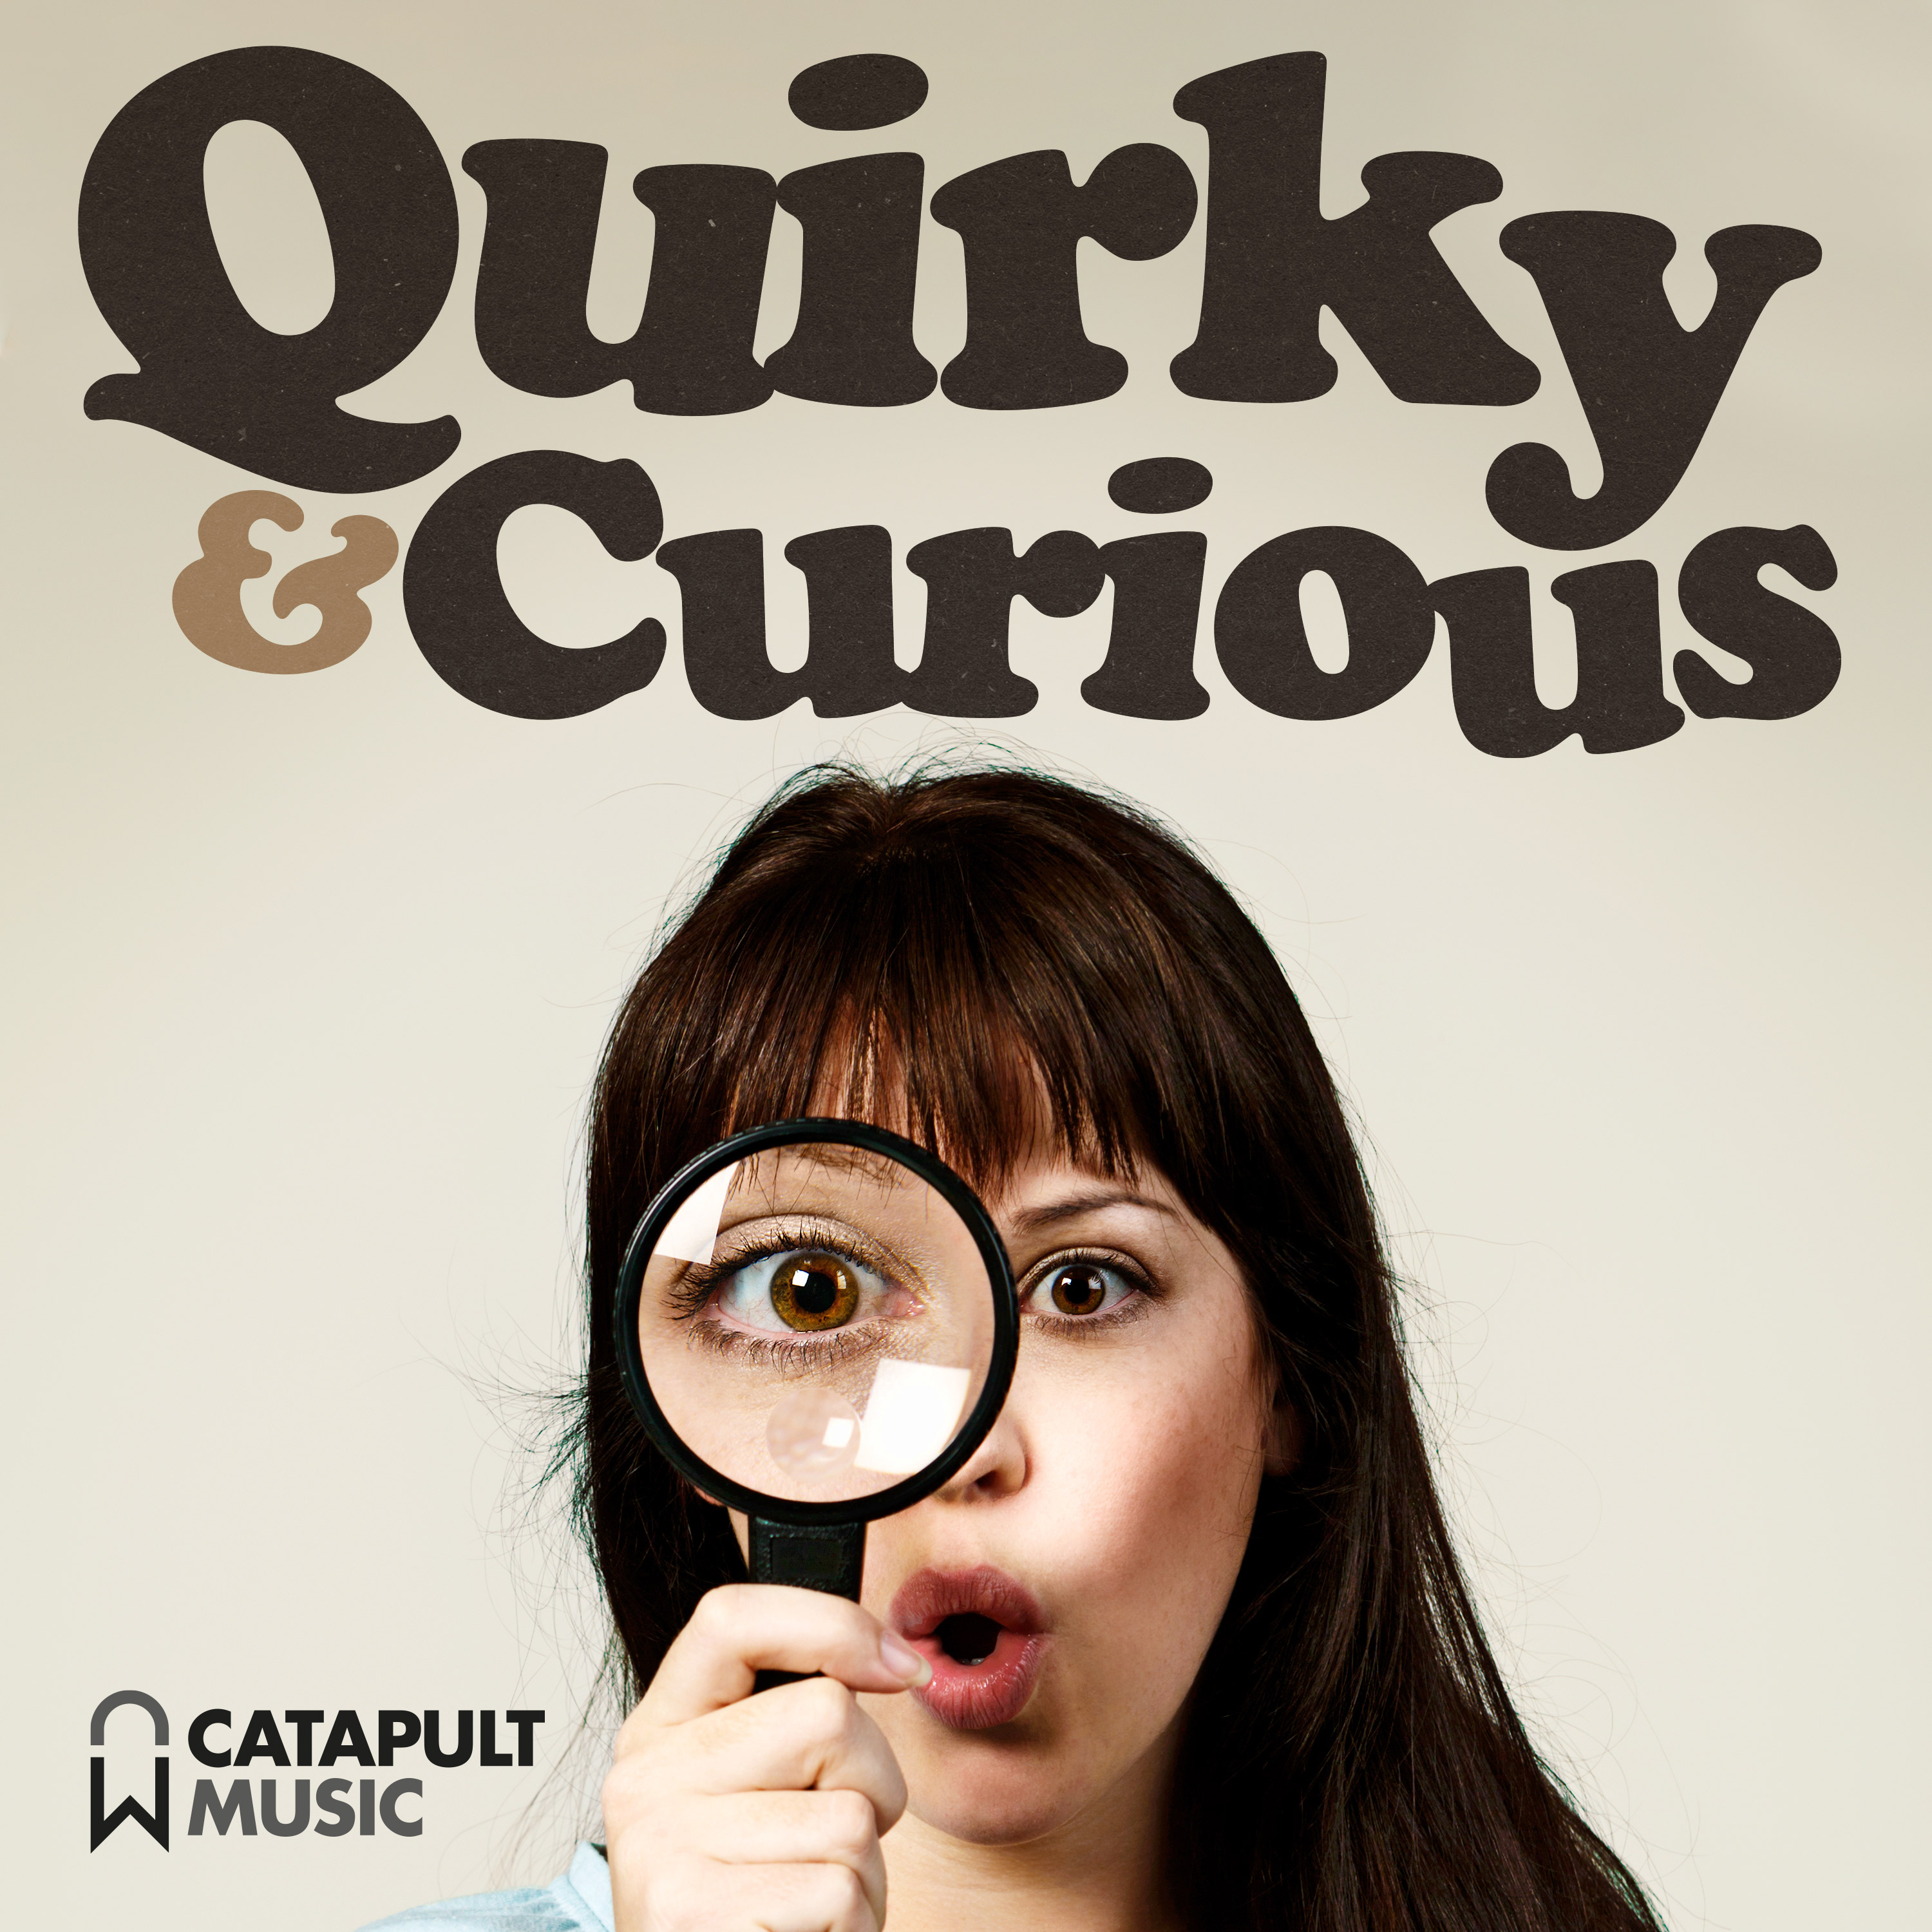 Quirky And Curious